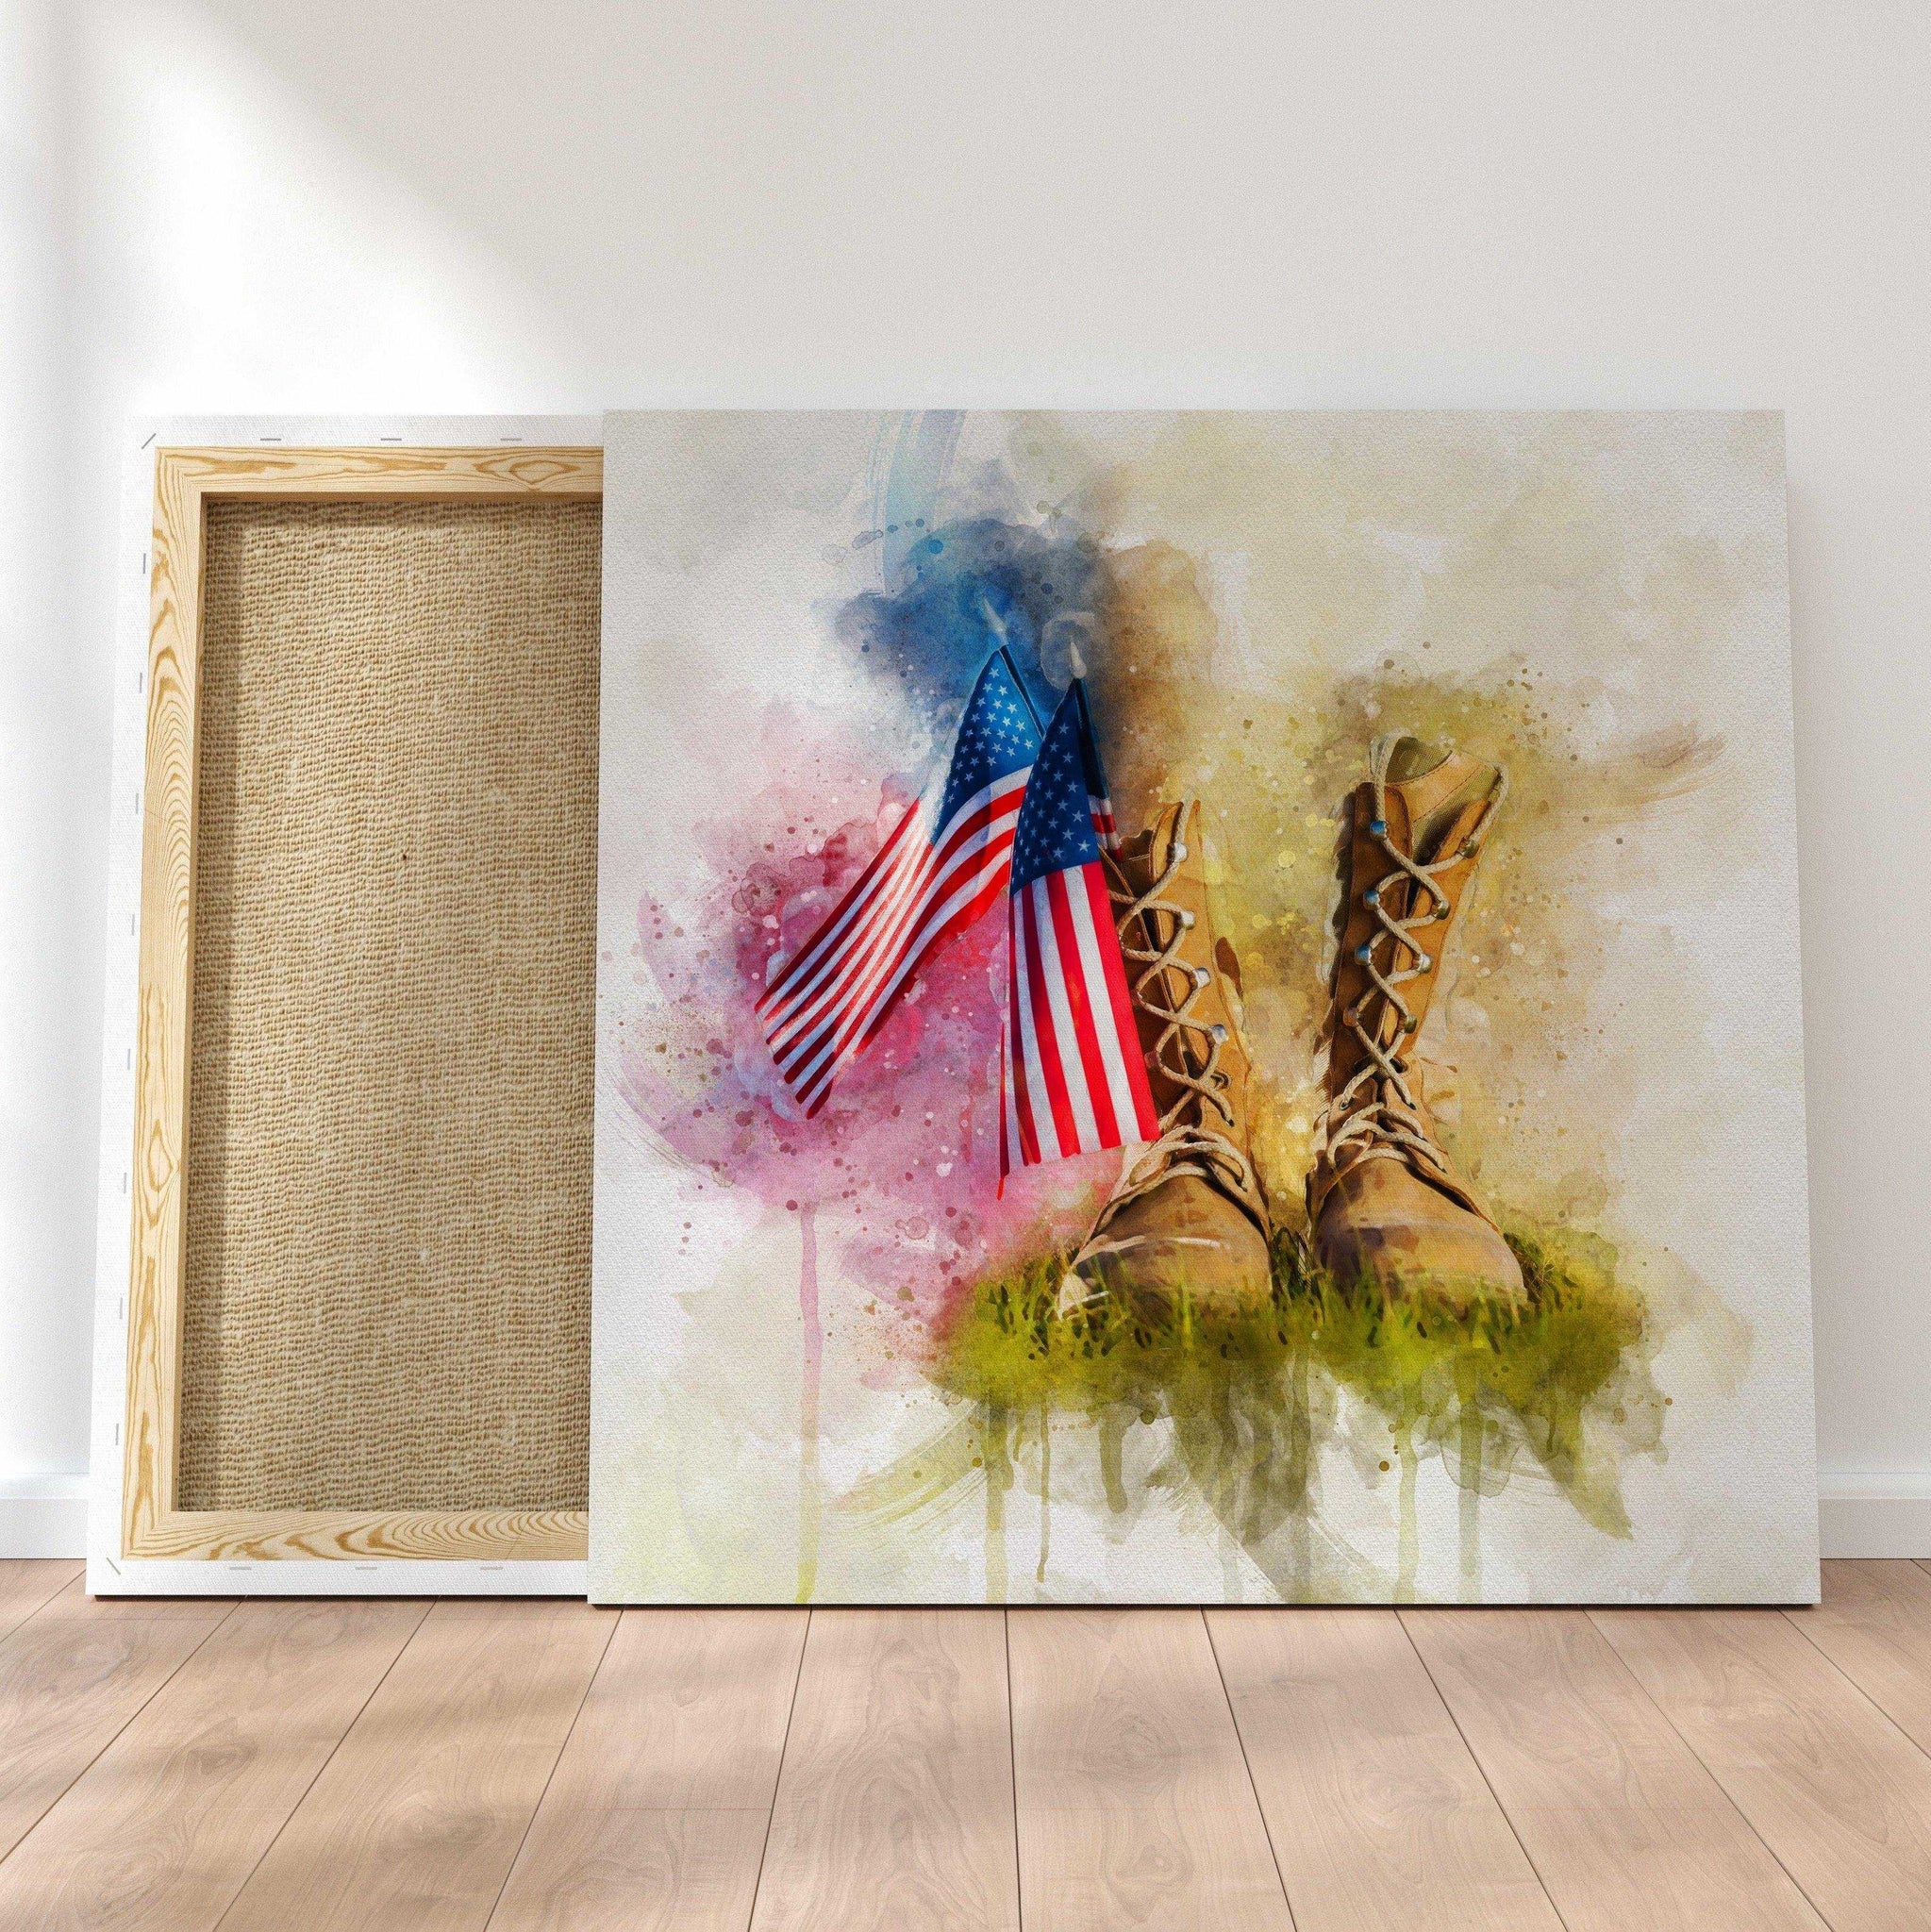 American Flag Wall Art, Patriotic Wall Decor, Canvas Art Prints, Wall Decor with US Flag - FromPicToArt